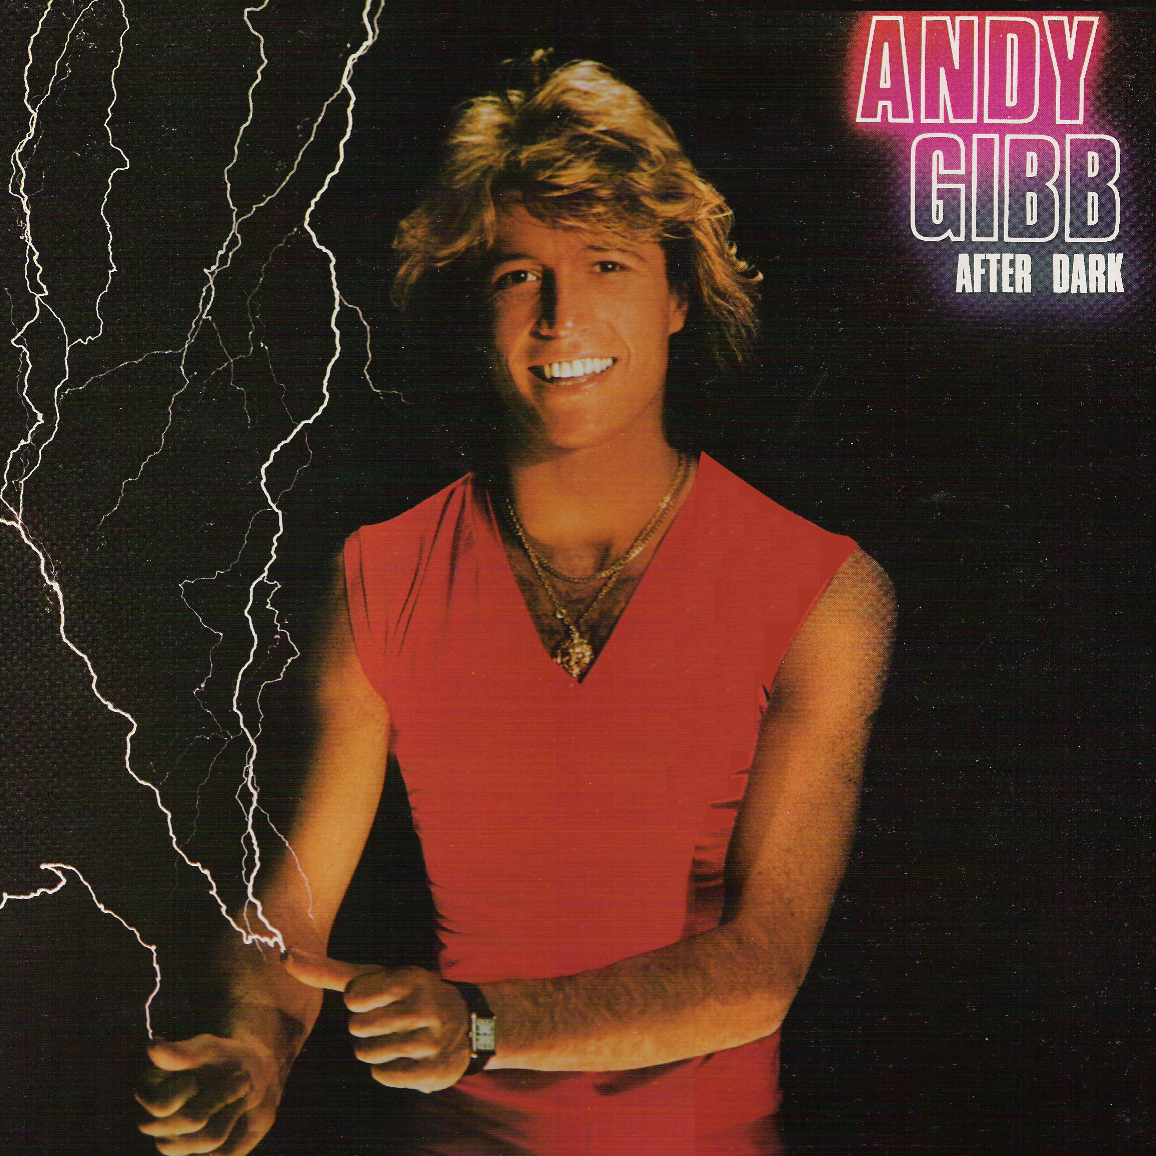 After Dark LP by Andy Gibb